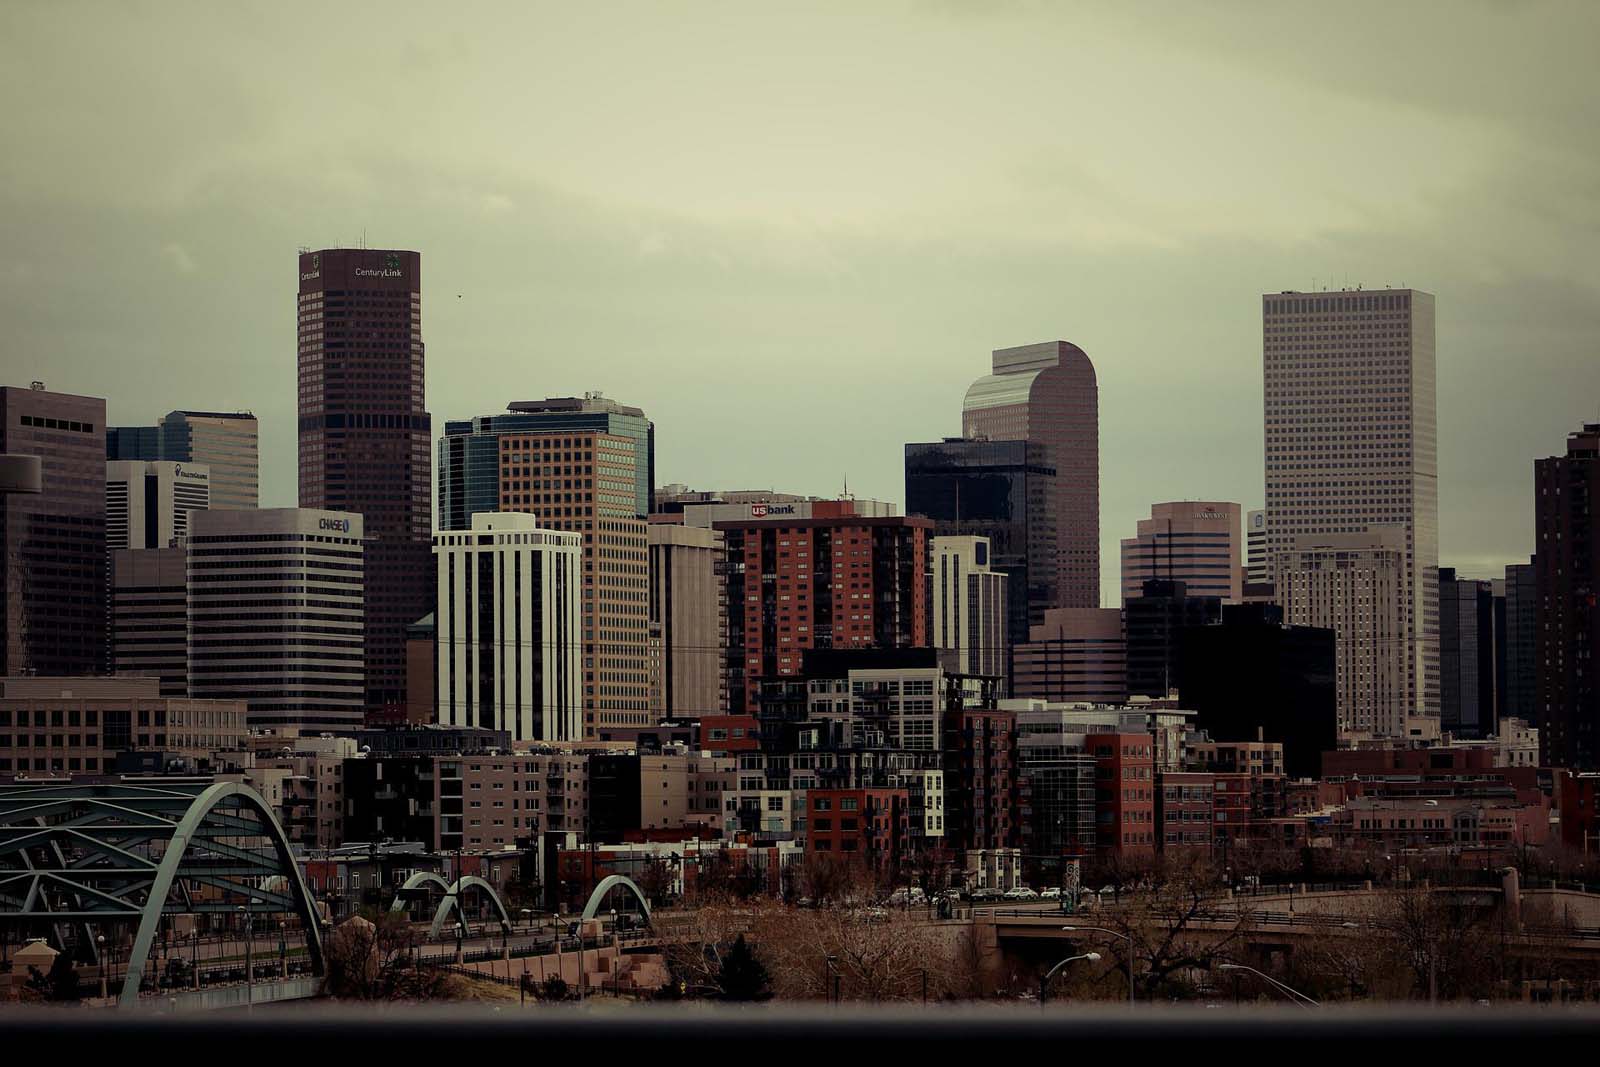 where to stay in denver colorado final thoughts